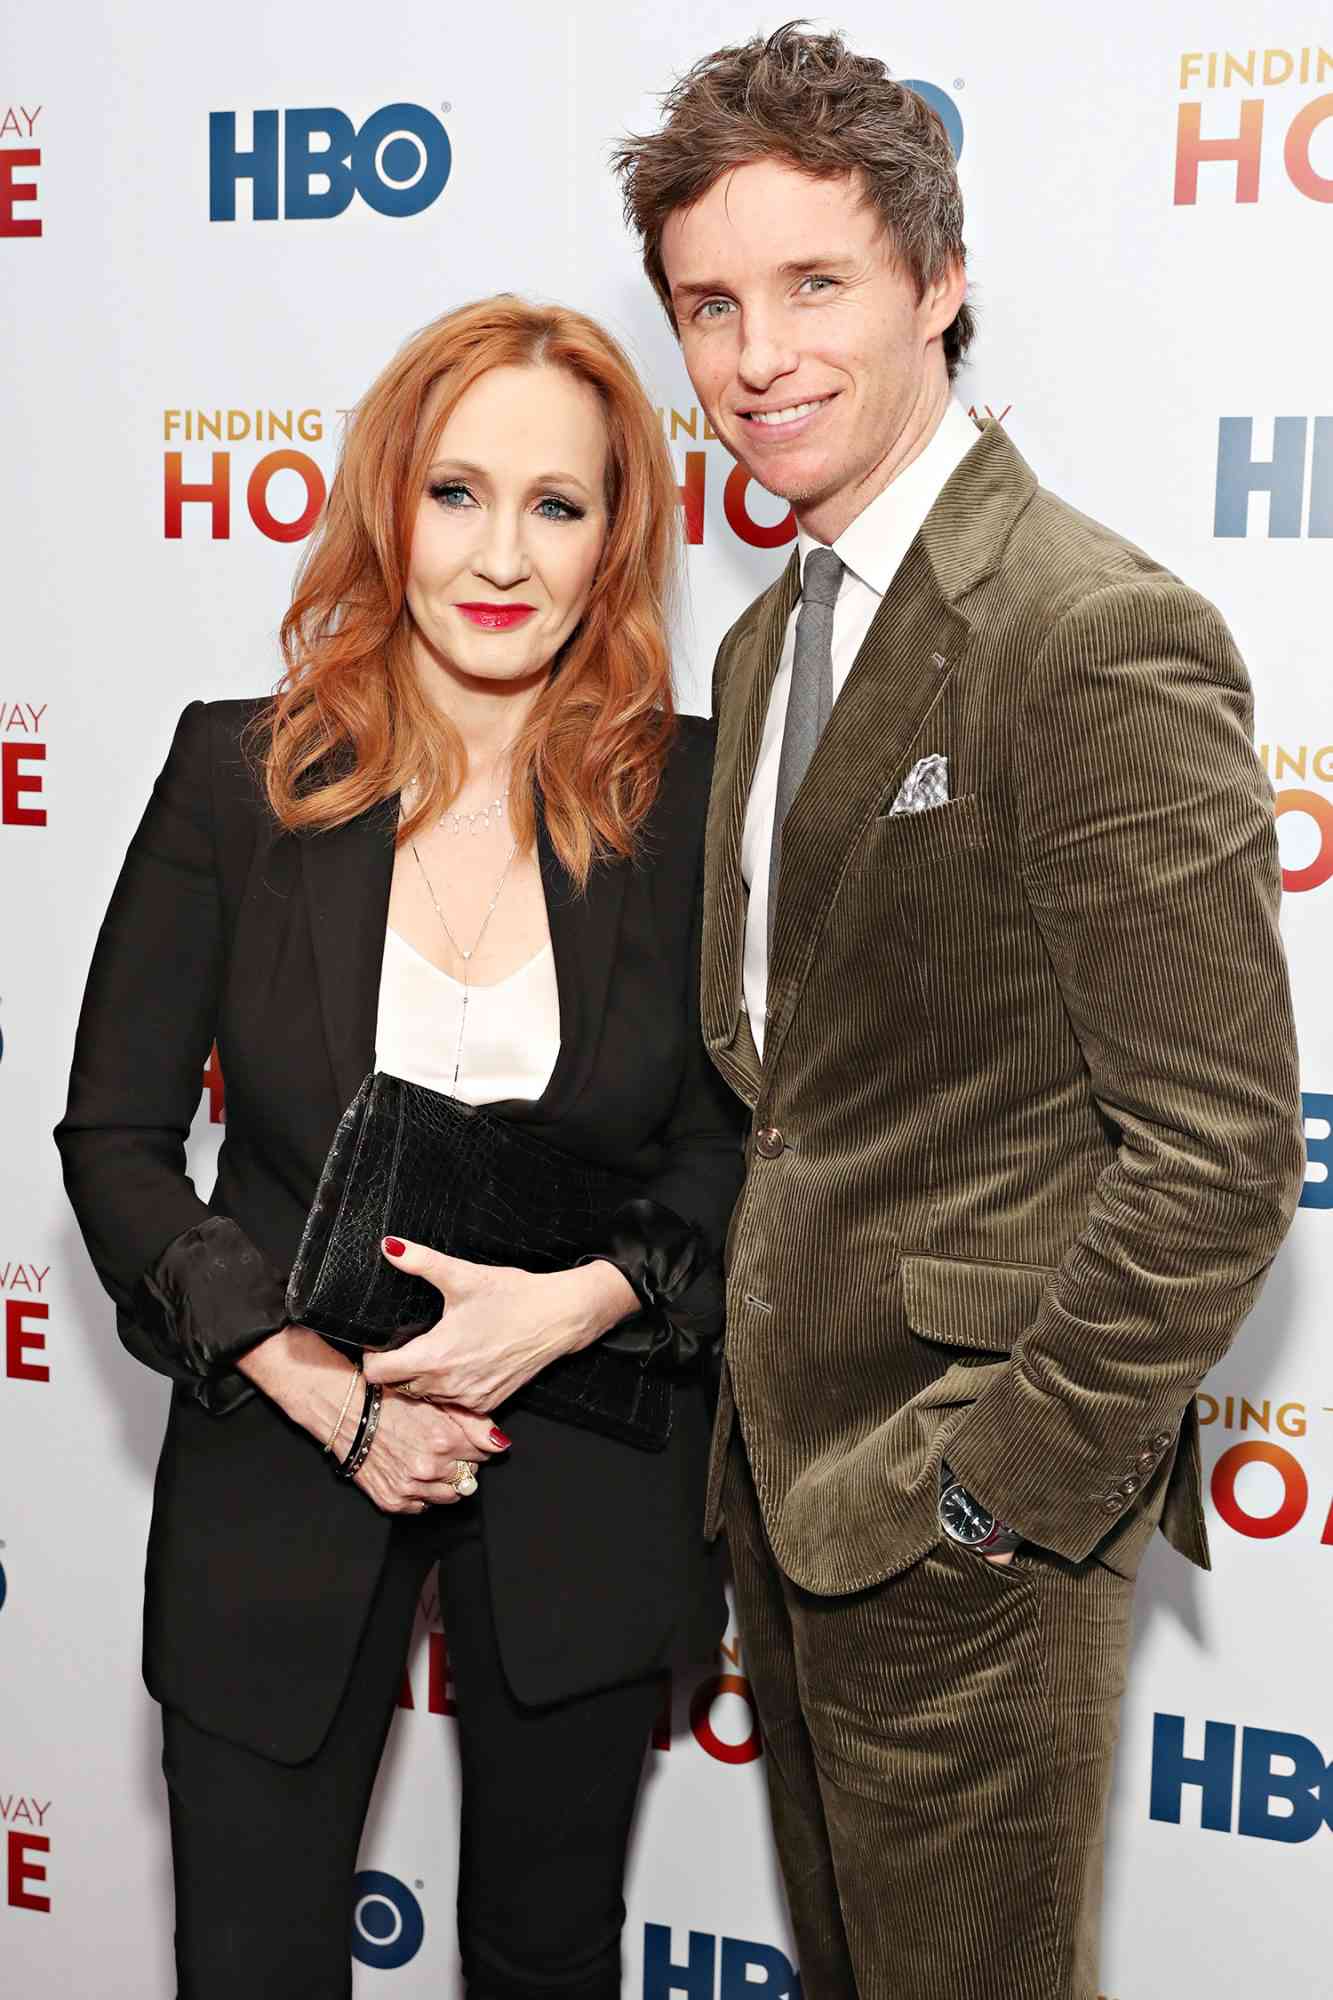 J.K. Rowling and Eddie Redmayne attend HBO's "Finding The Way Home" World Premiere at Hudson Yards on December 11, 2019 in New York City